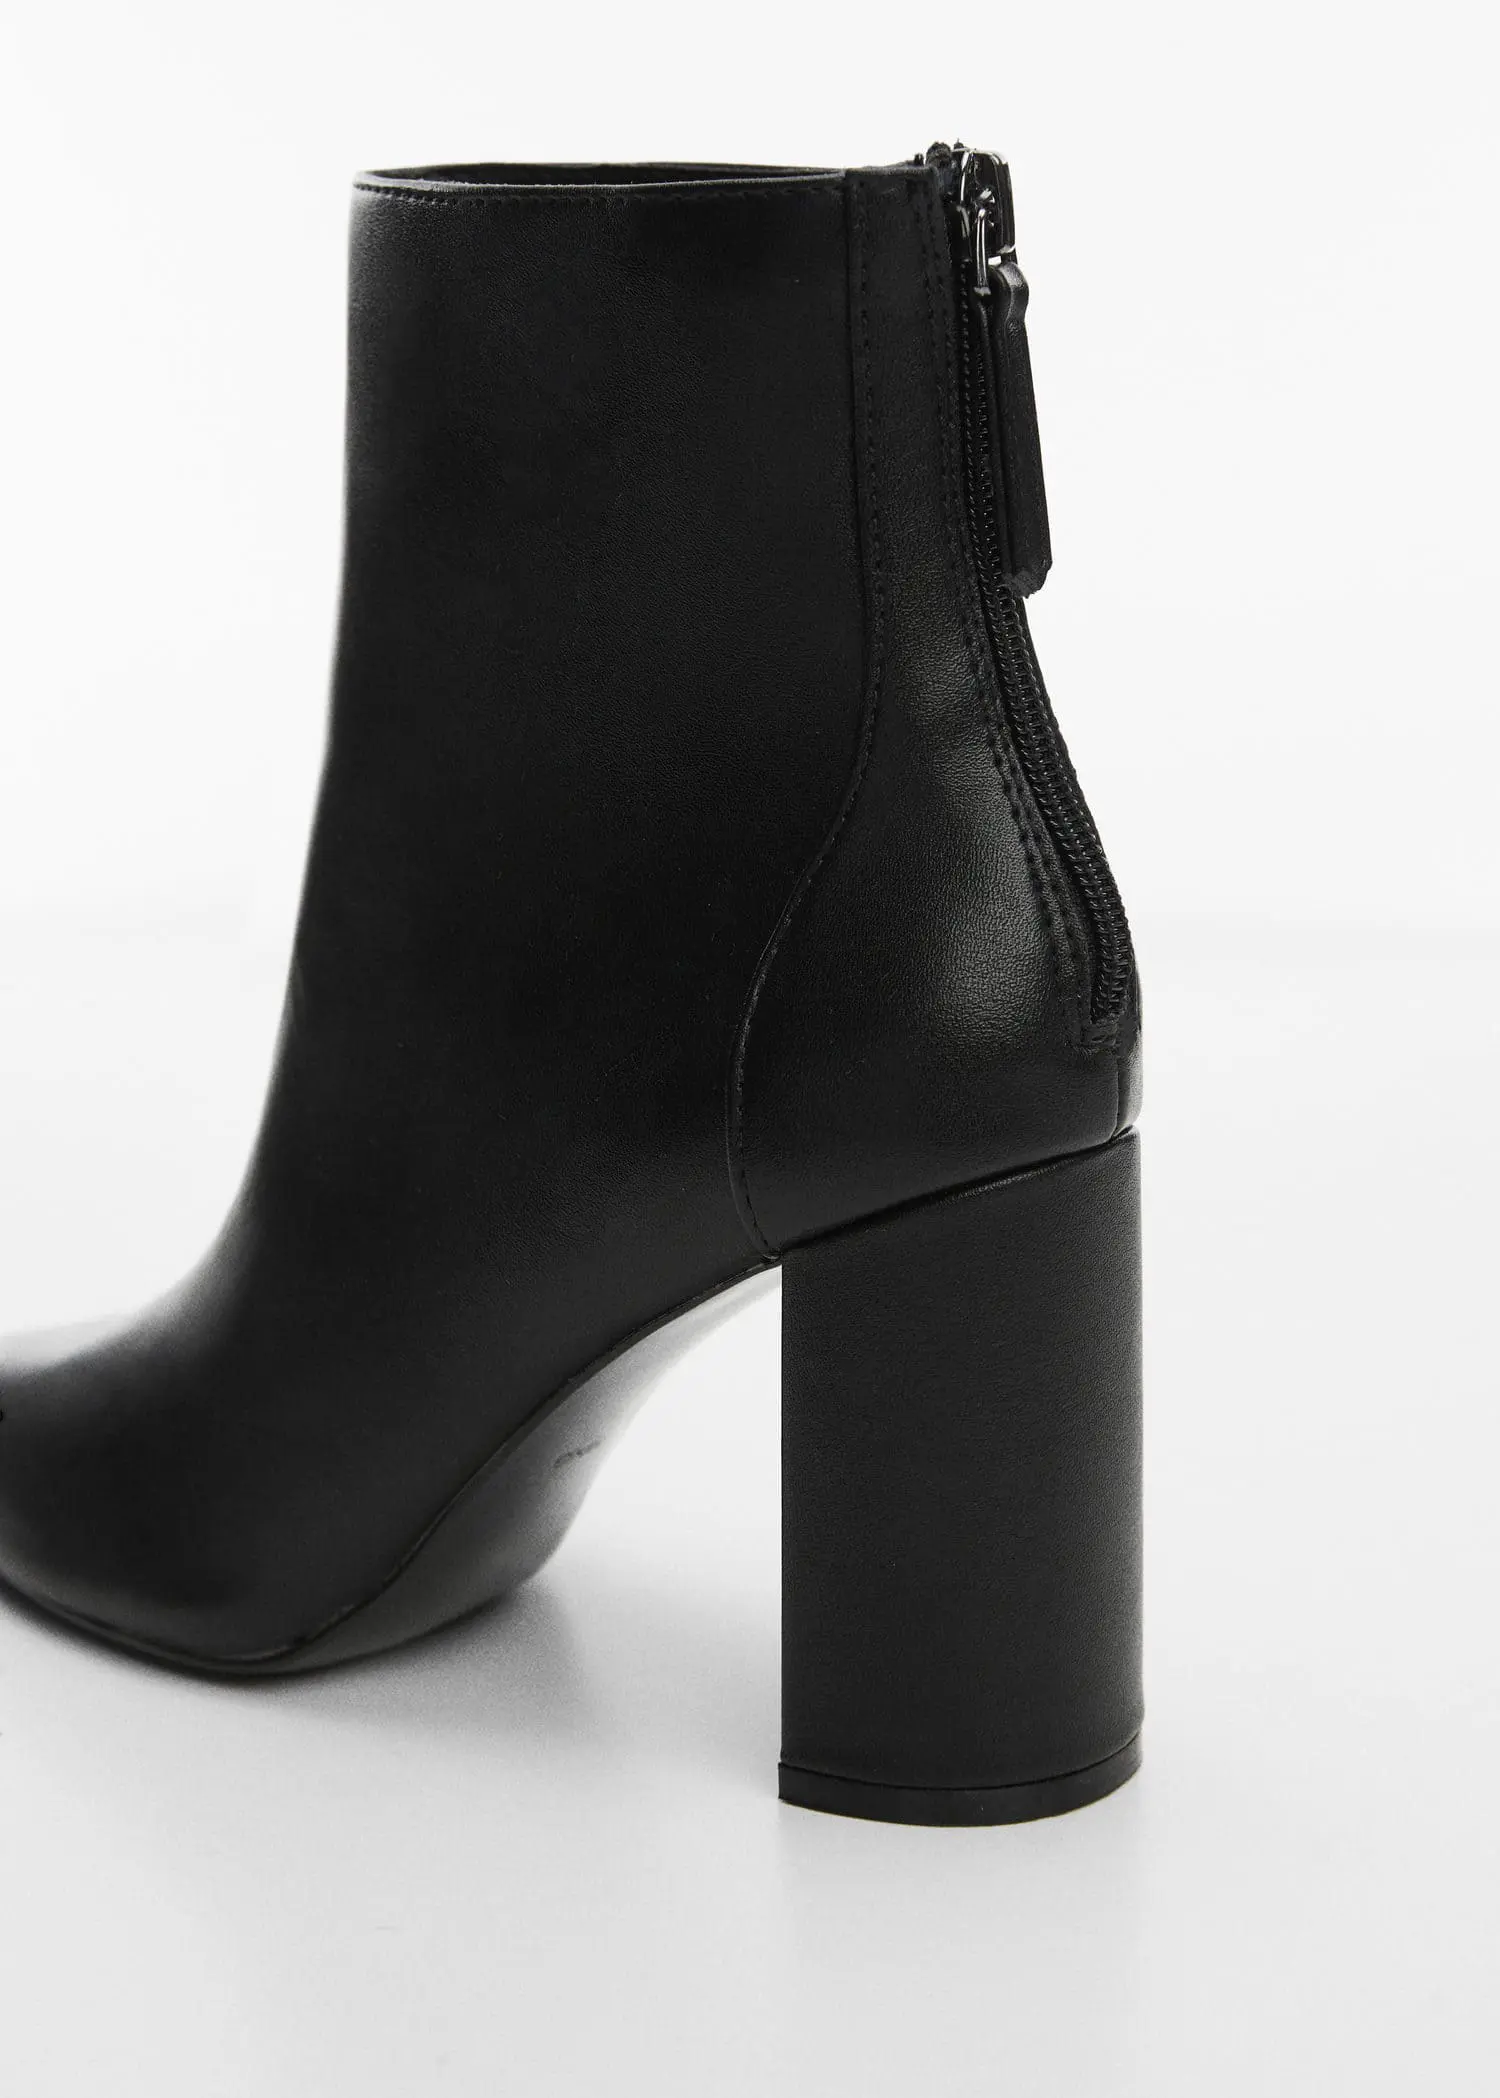 Mango Pointed-toe ankle boot swith zip closure. 2